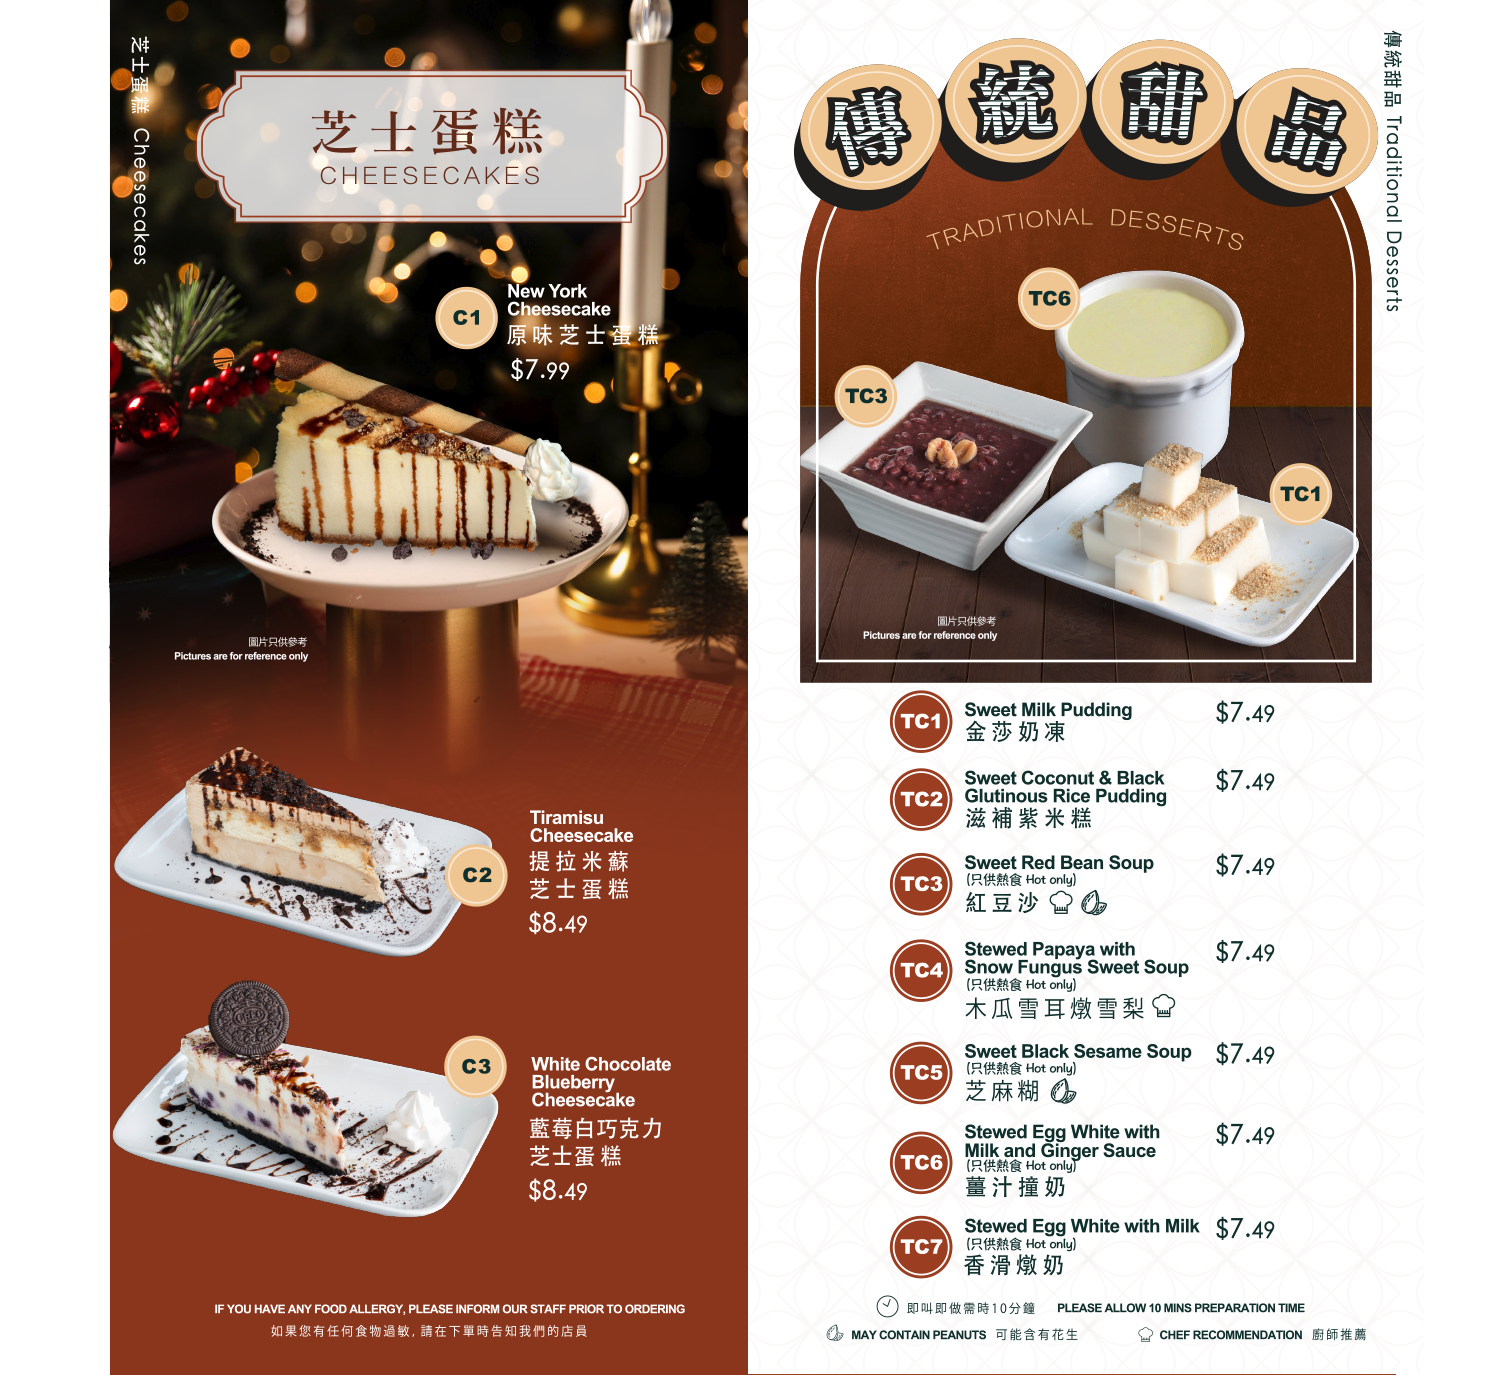 Menu Page Cheese Cakes and Traditional Desserts